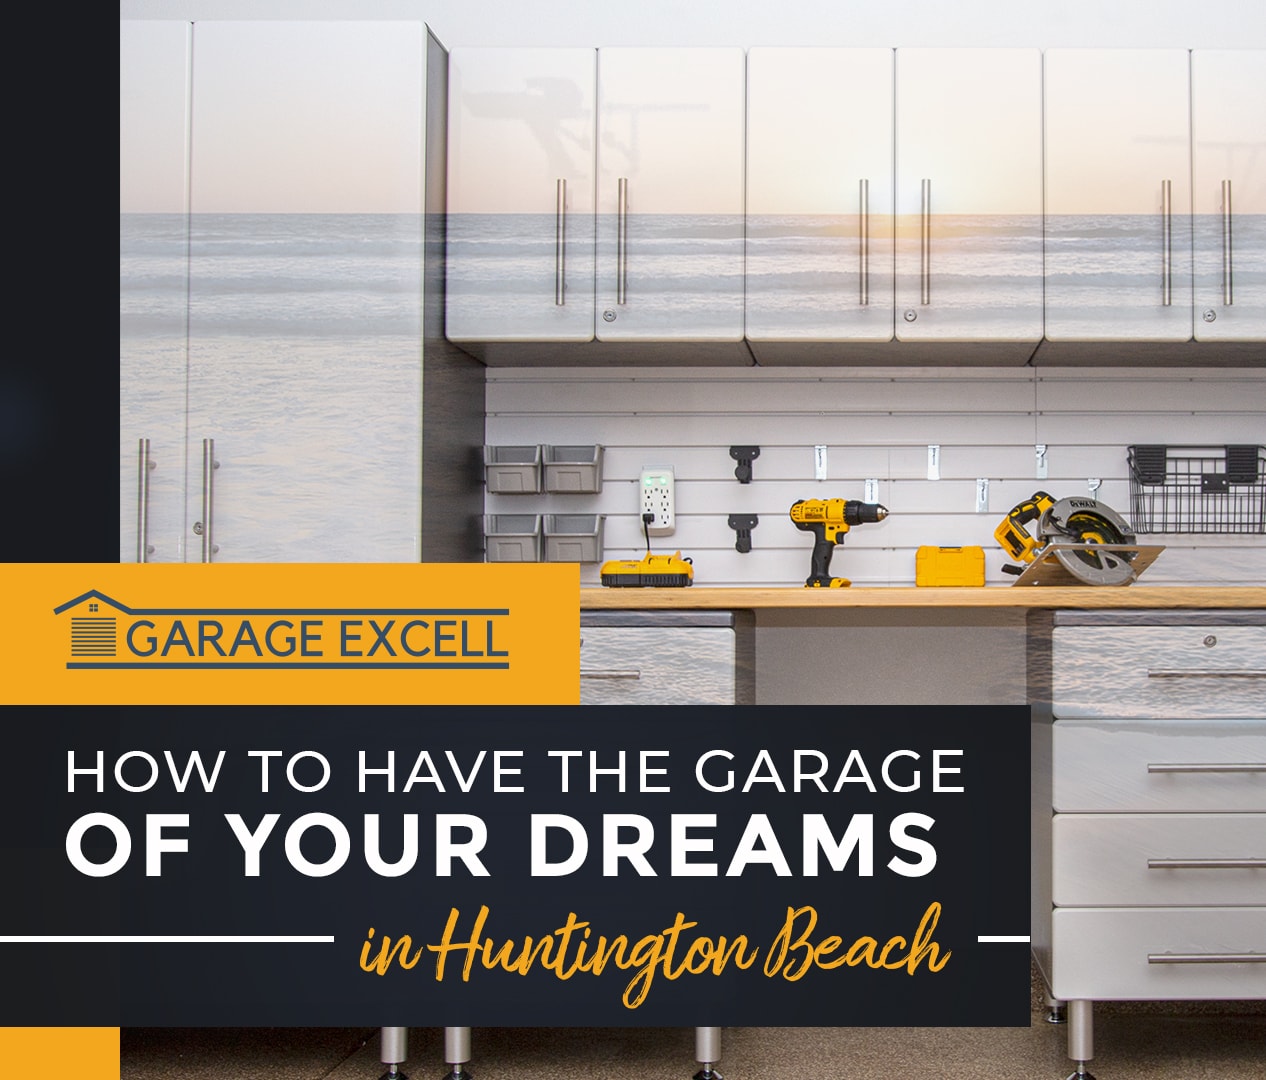 How to Have the Garage of Your Dreams in Huntington Beach